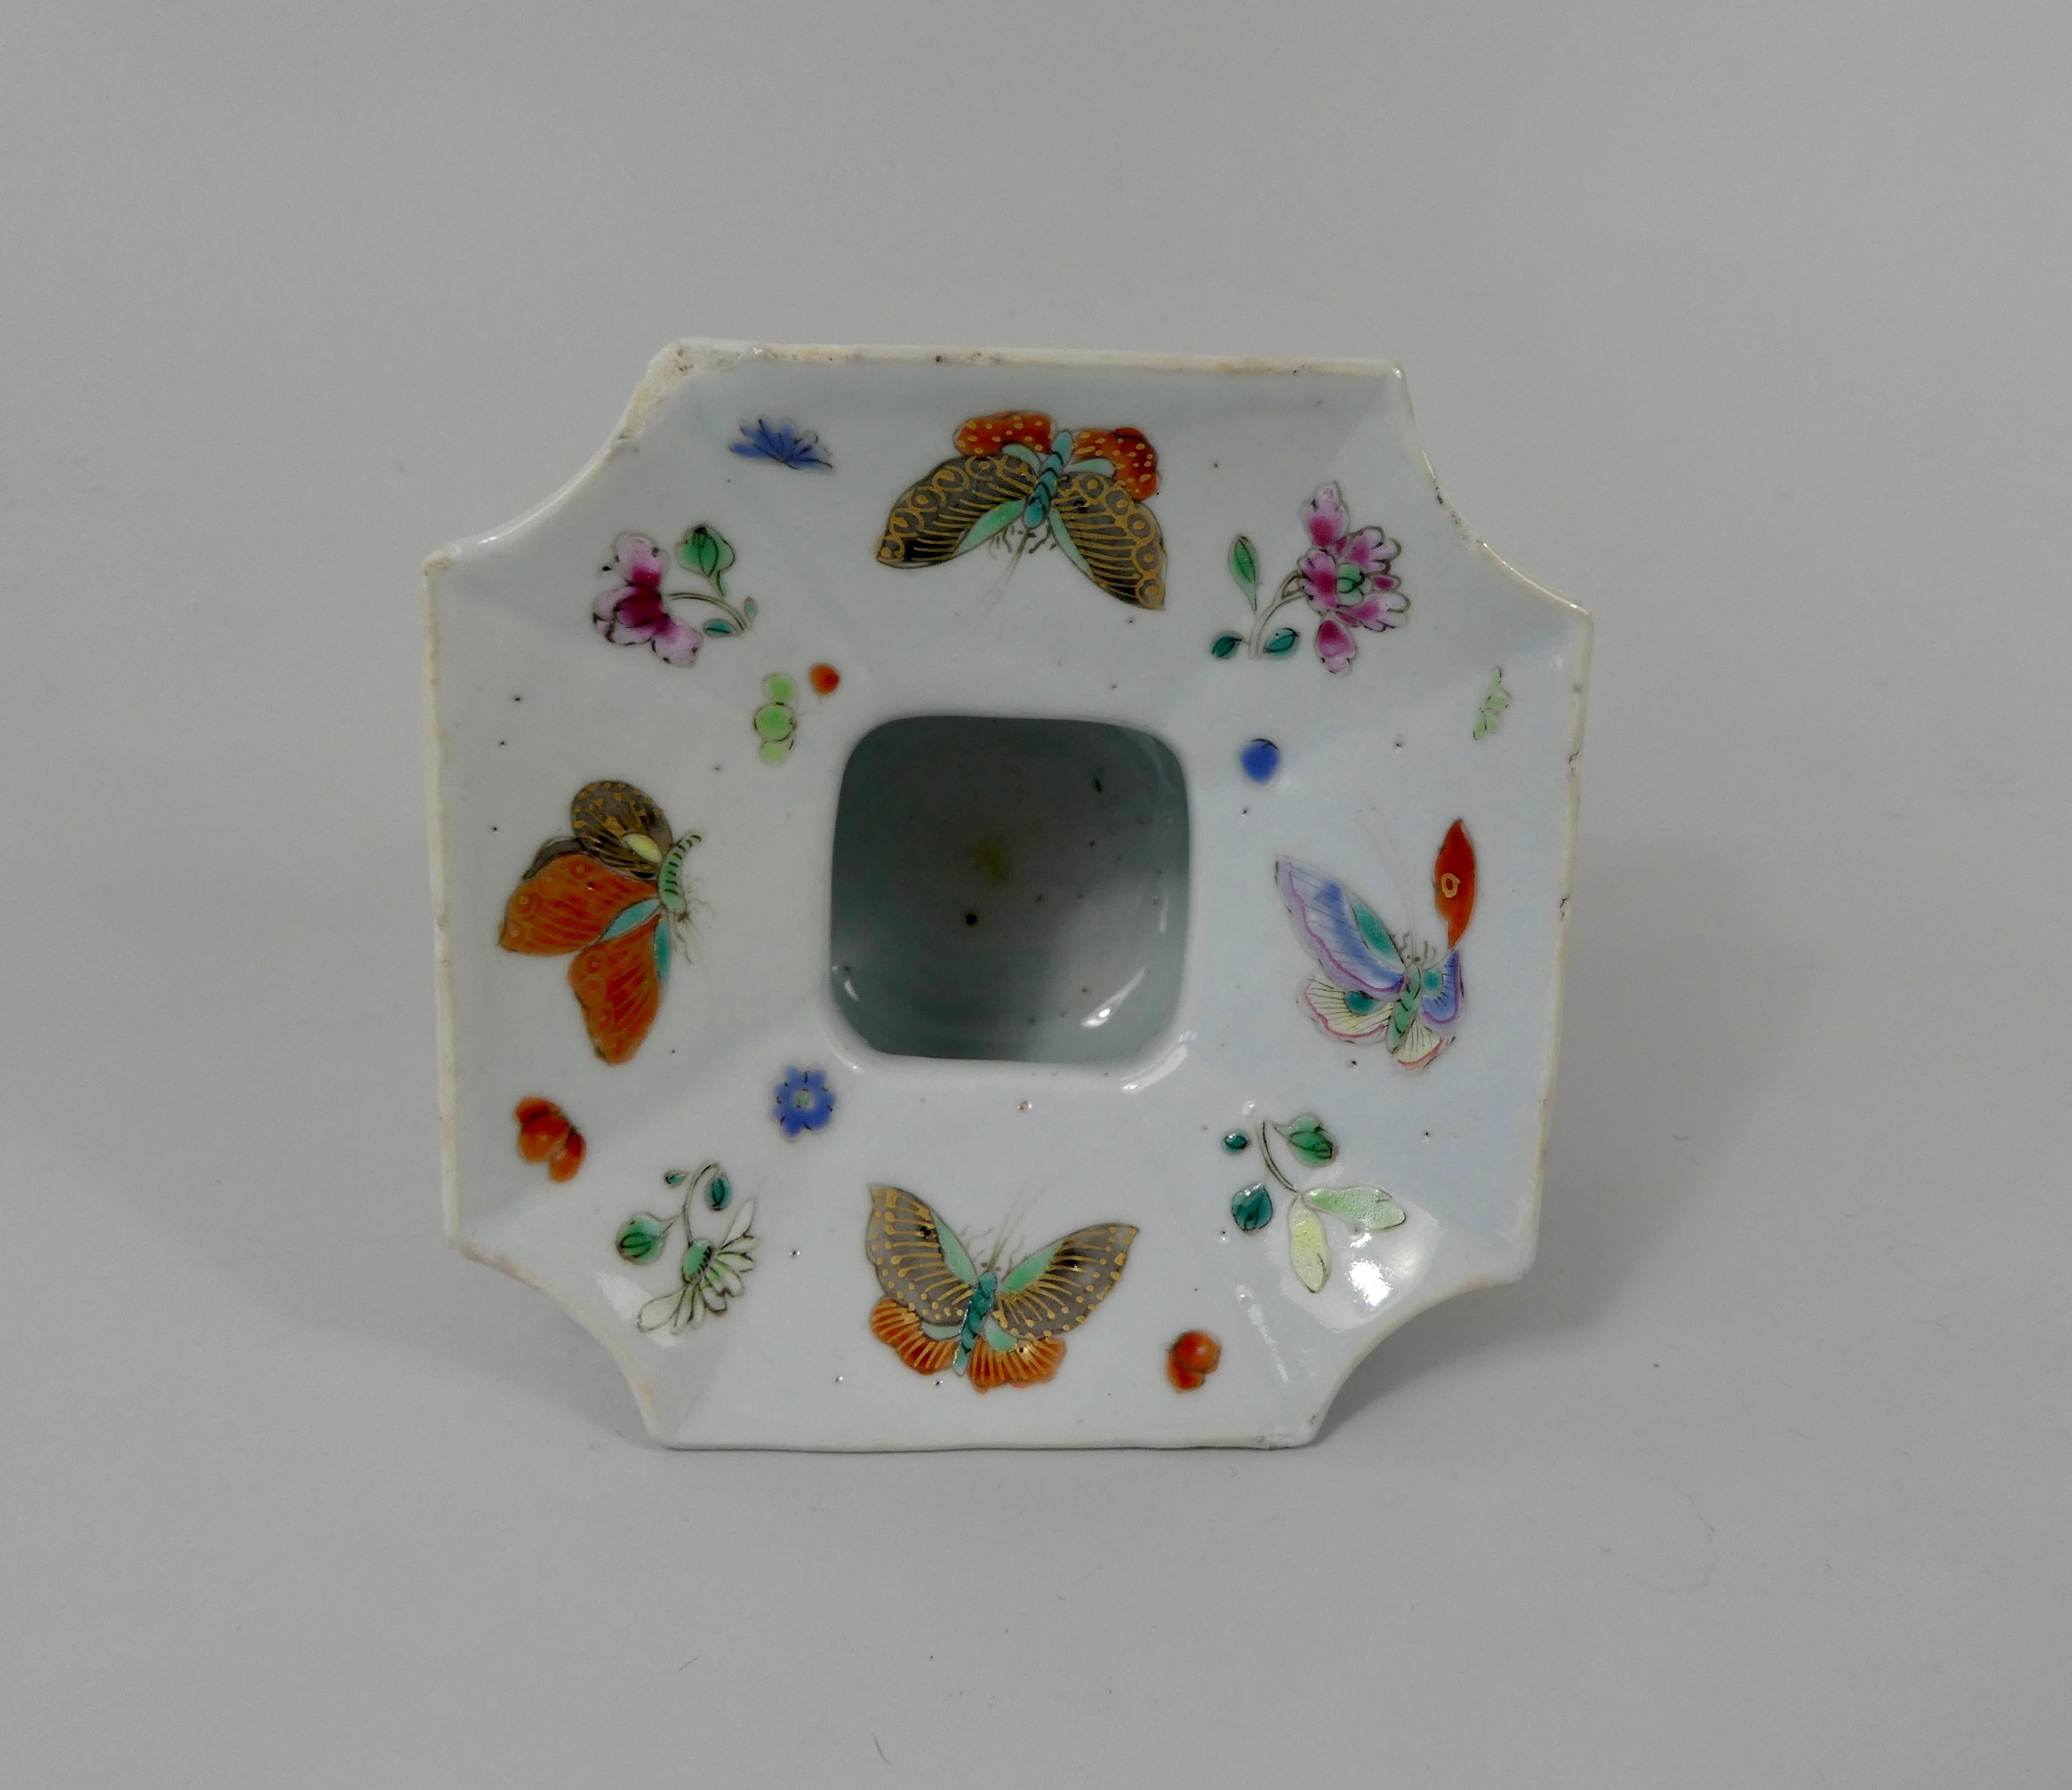 Chinese porcelain cuspidor, circa 1730, Qianlong Period. The squared form vessel, with canted corners, painted in fencai or famille rose enamels, with butterflies, amongst sprays of flowers. Having a loop handle, painted with a stylised flowering